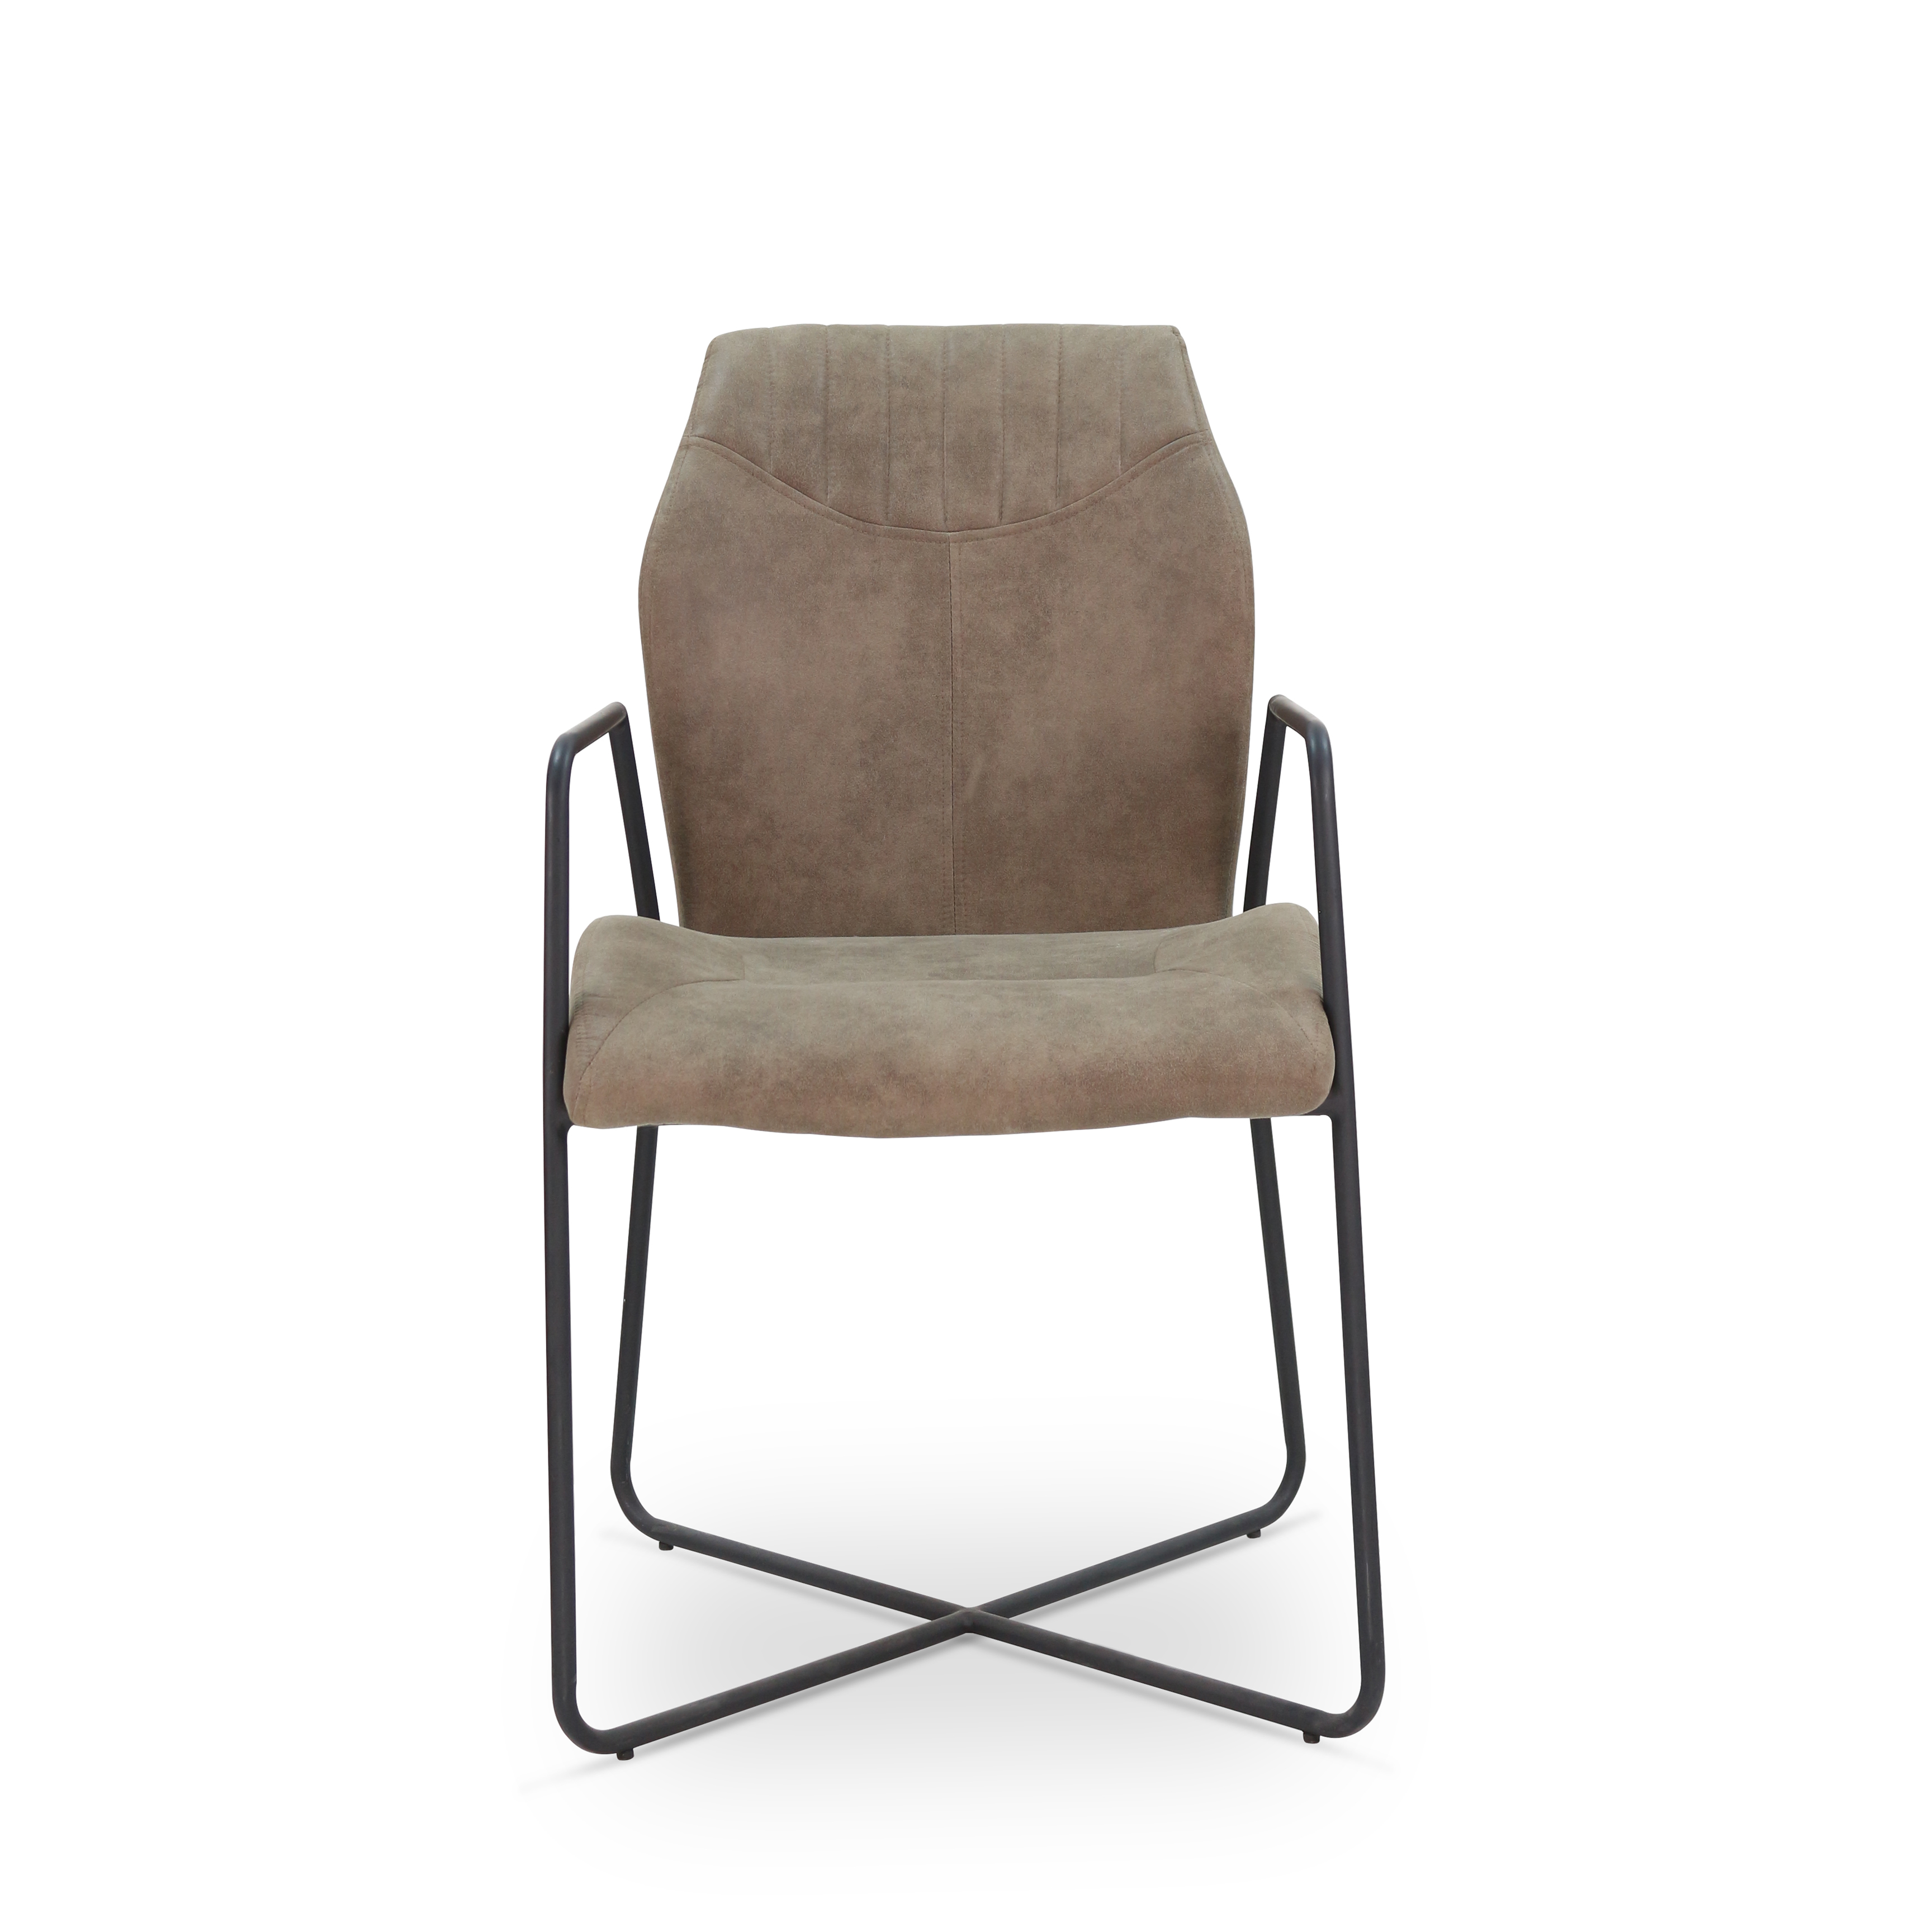 High Armrest Fabric Dining Chair for dining room or living room